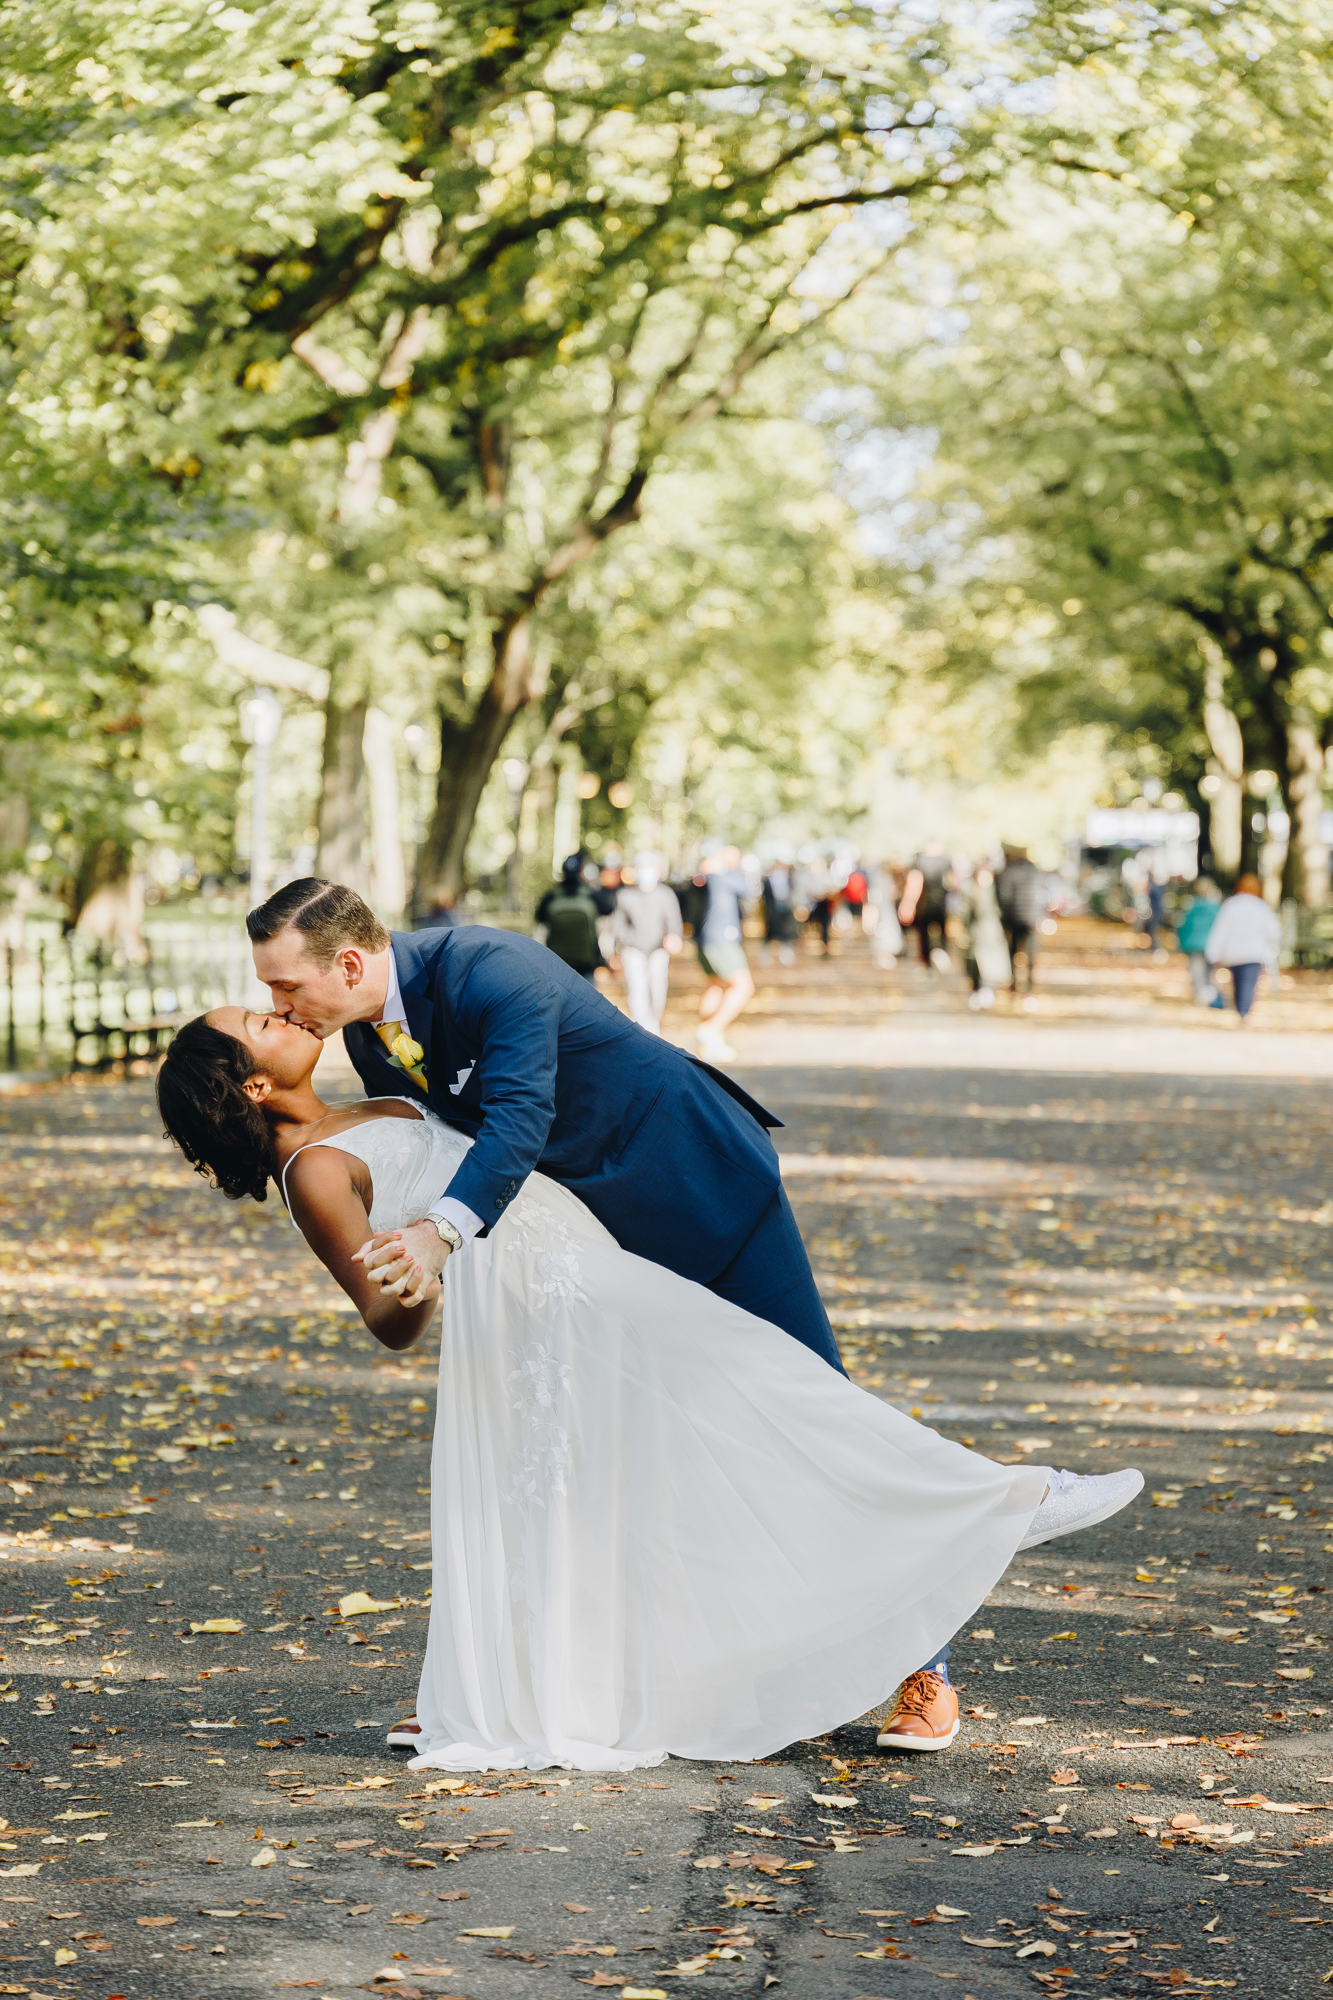 Beautiful Central Park Elopement Photos in NYC